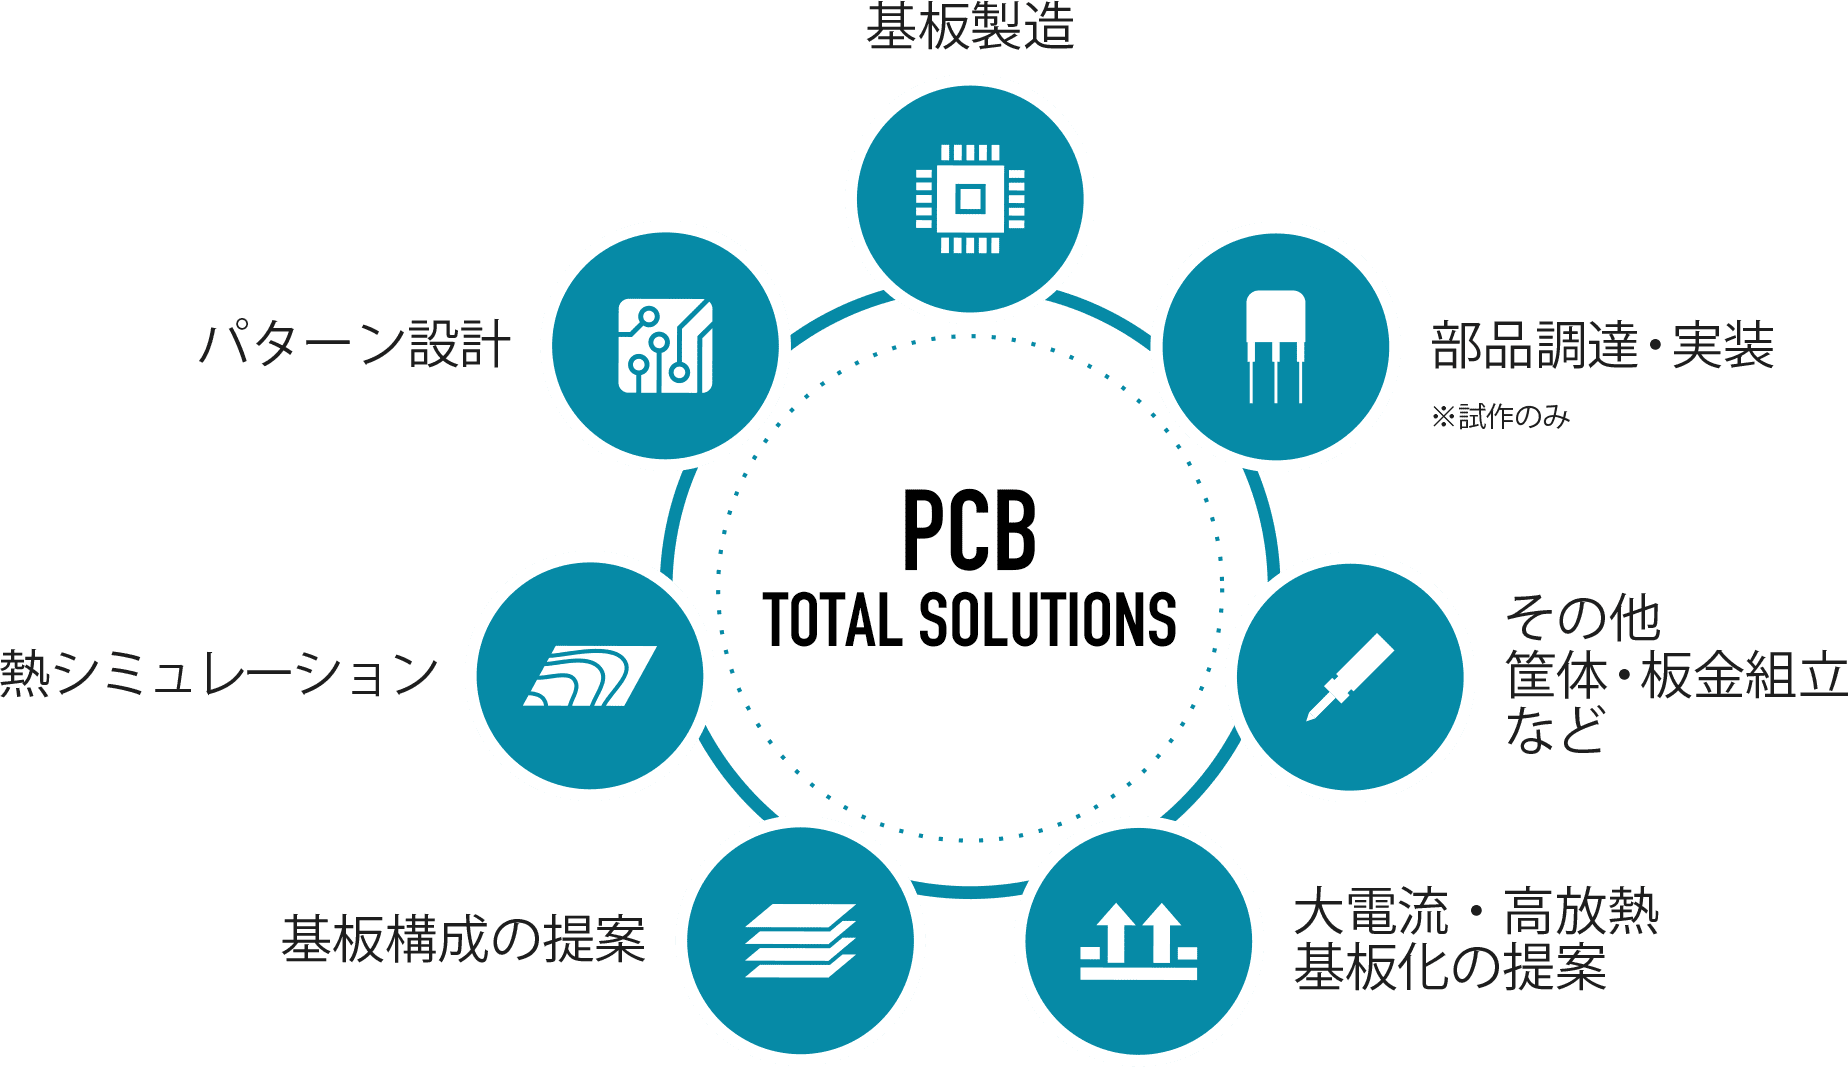 PCB TOTAL SOLUTIONS